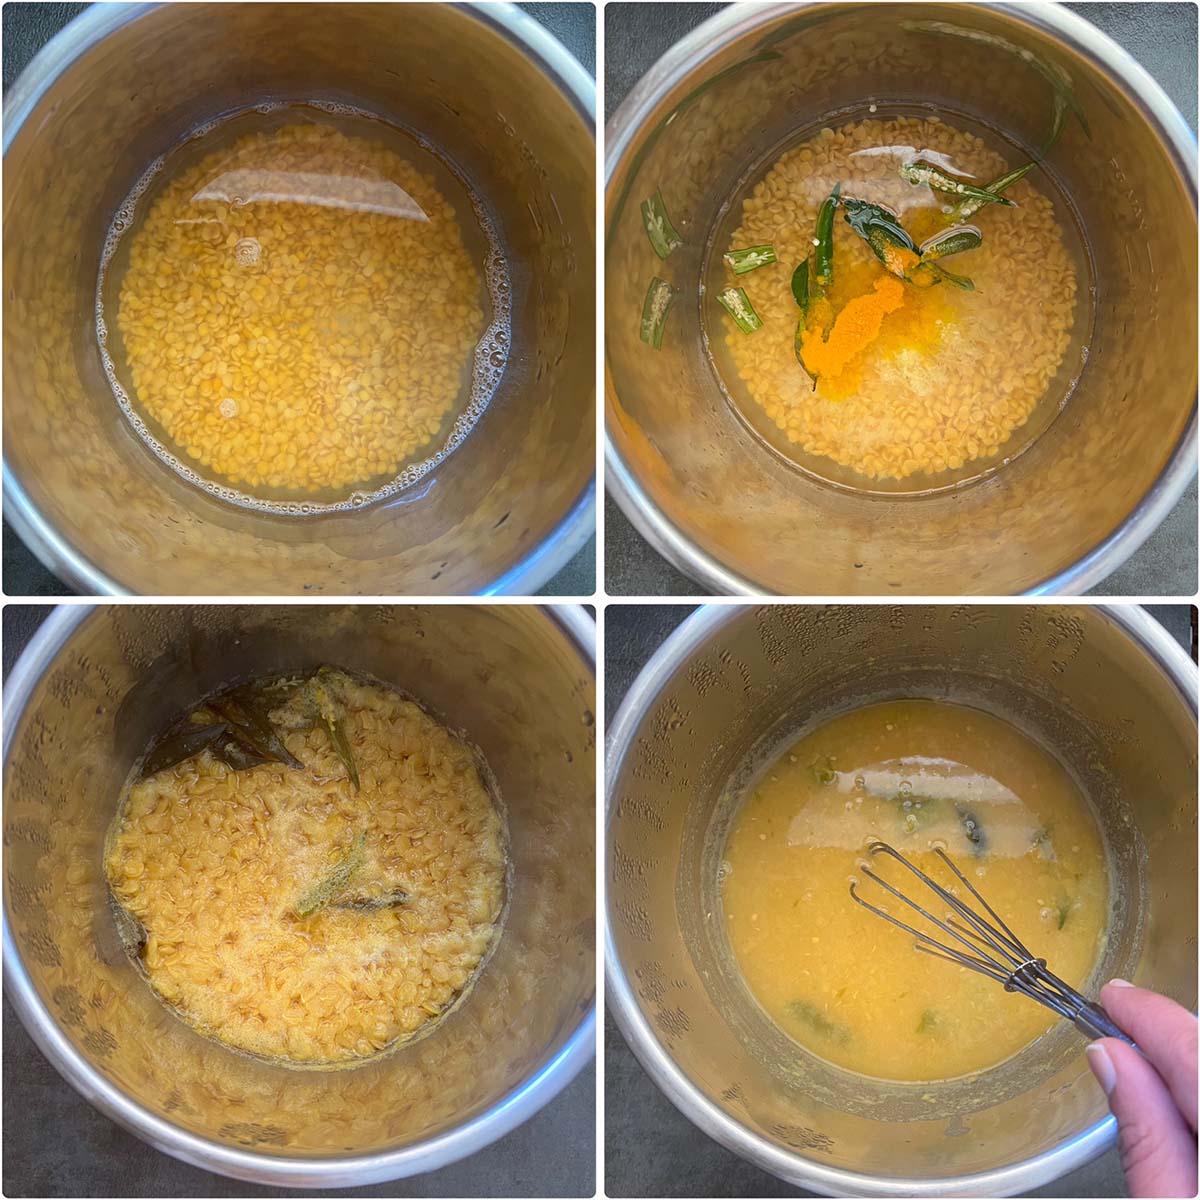 4 panel photo showing the instant pot with dal, green chilies and ginger.